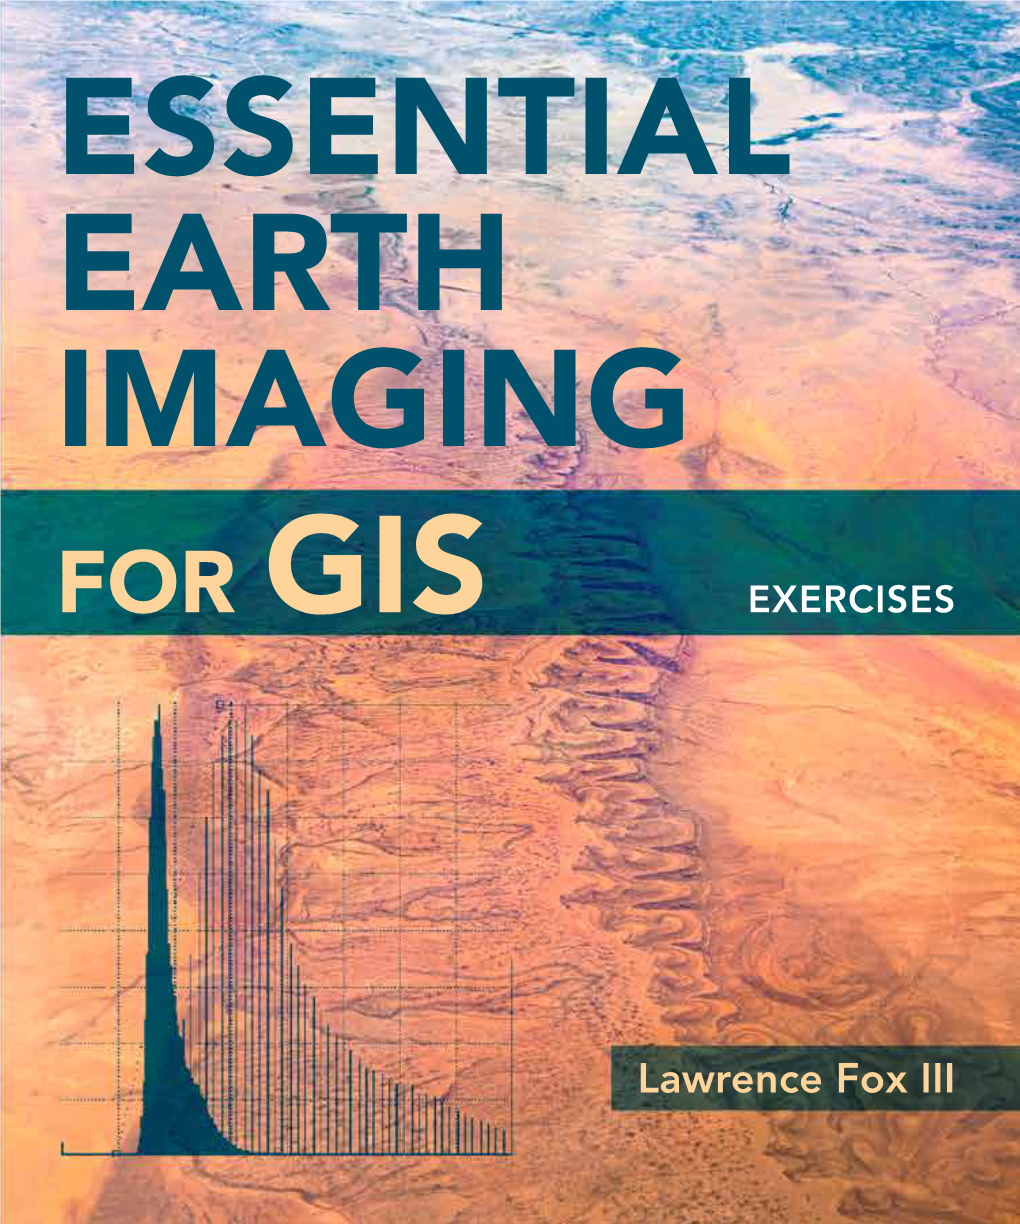 For Gis Essential Earth Imaging for Gis Earth